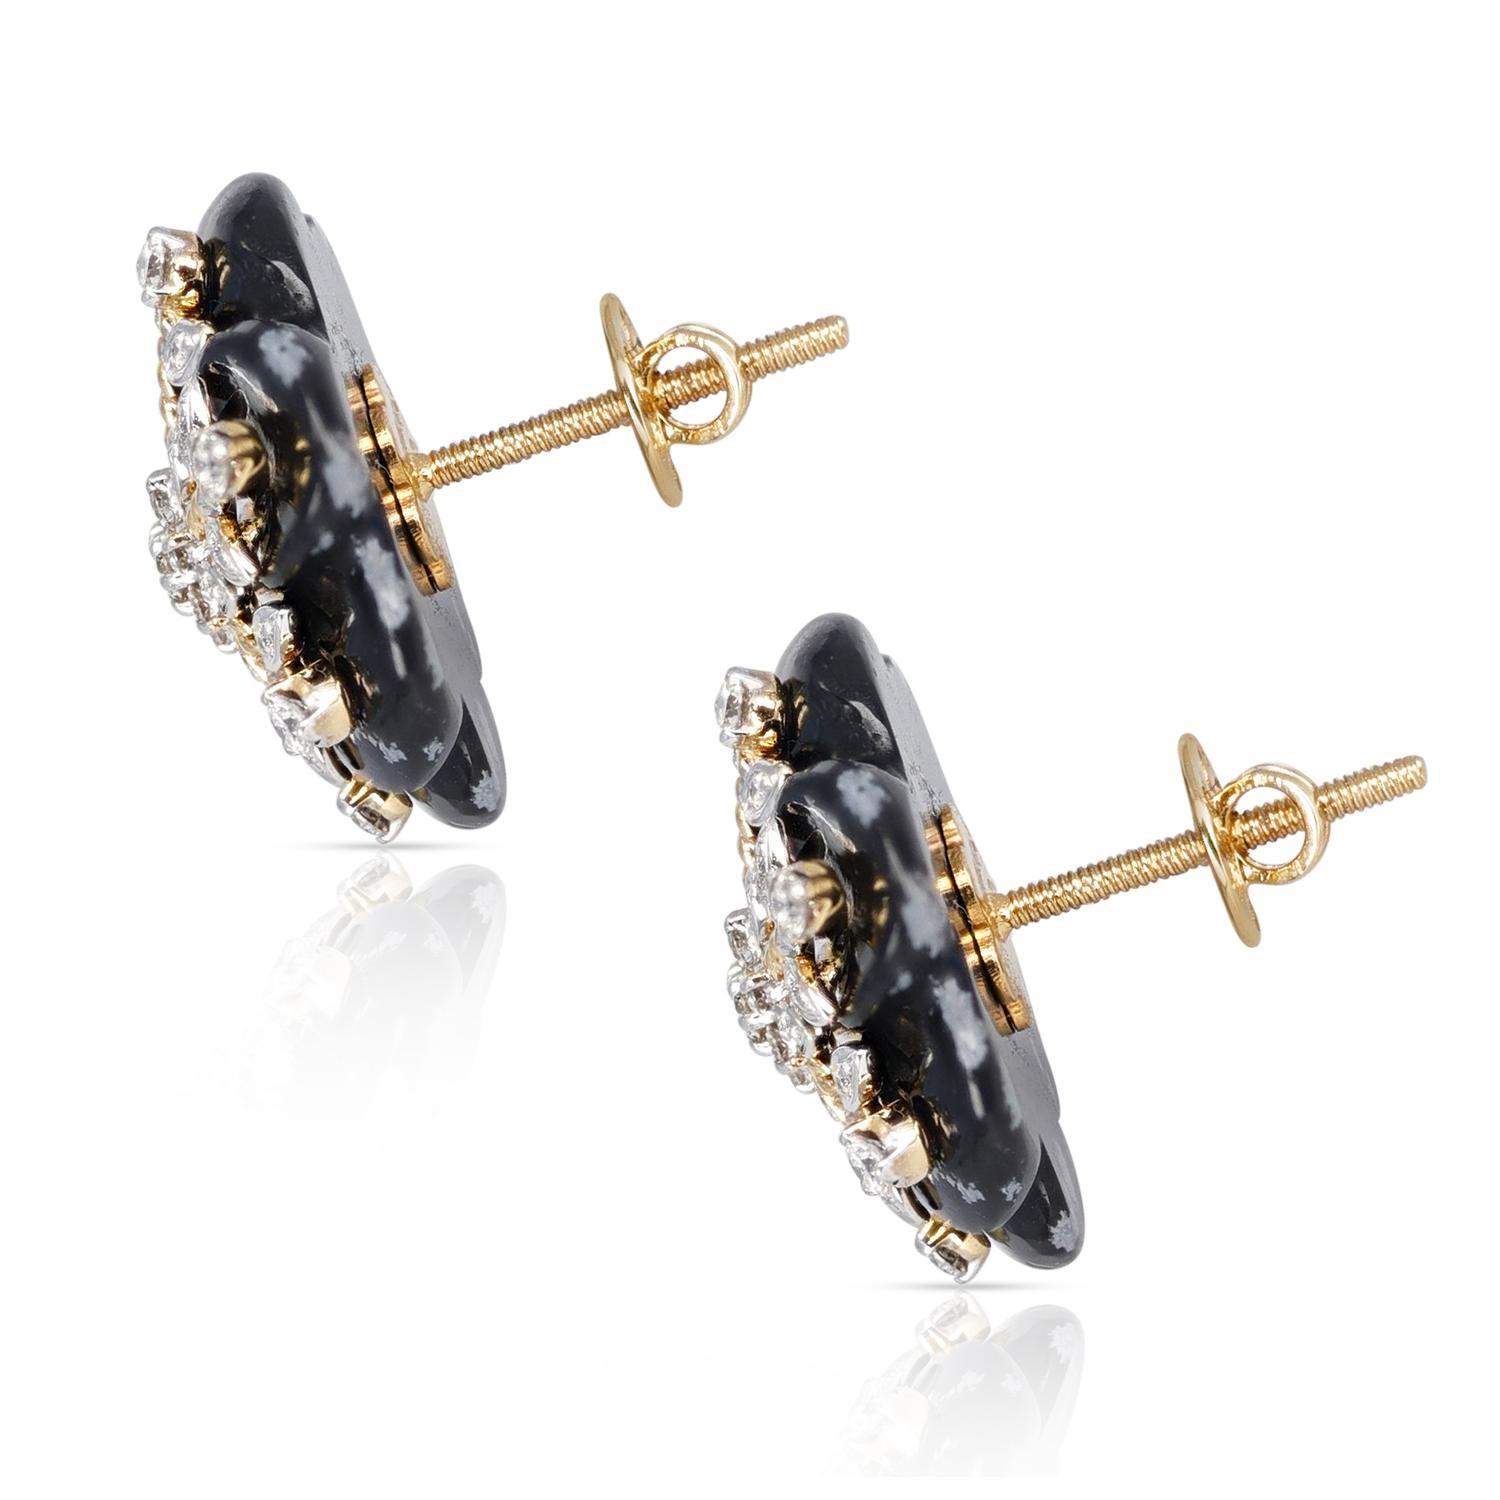 A pair of Snowflake Obsidian Earrings with 17.20 ct. Obsidian and 0.64 cts. Diamonds made in 14 Karat Yellow Gold. The total weight of the earrings is 6.60 grams. The length of the earrings is 0.65.